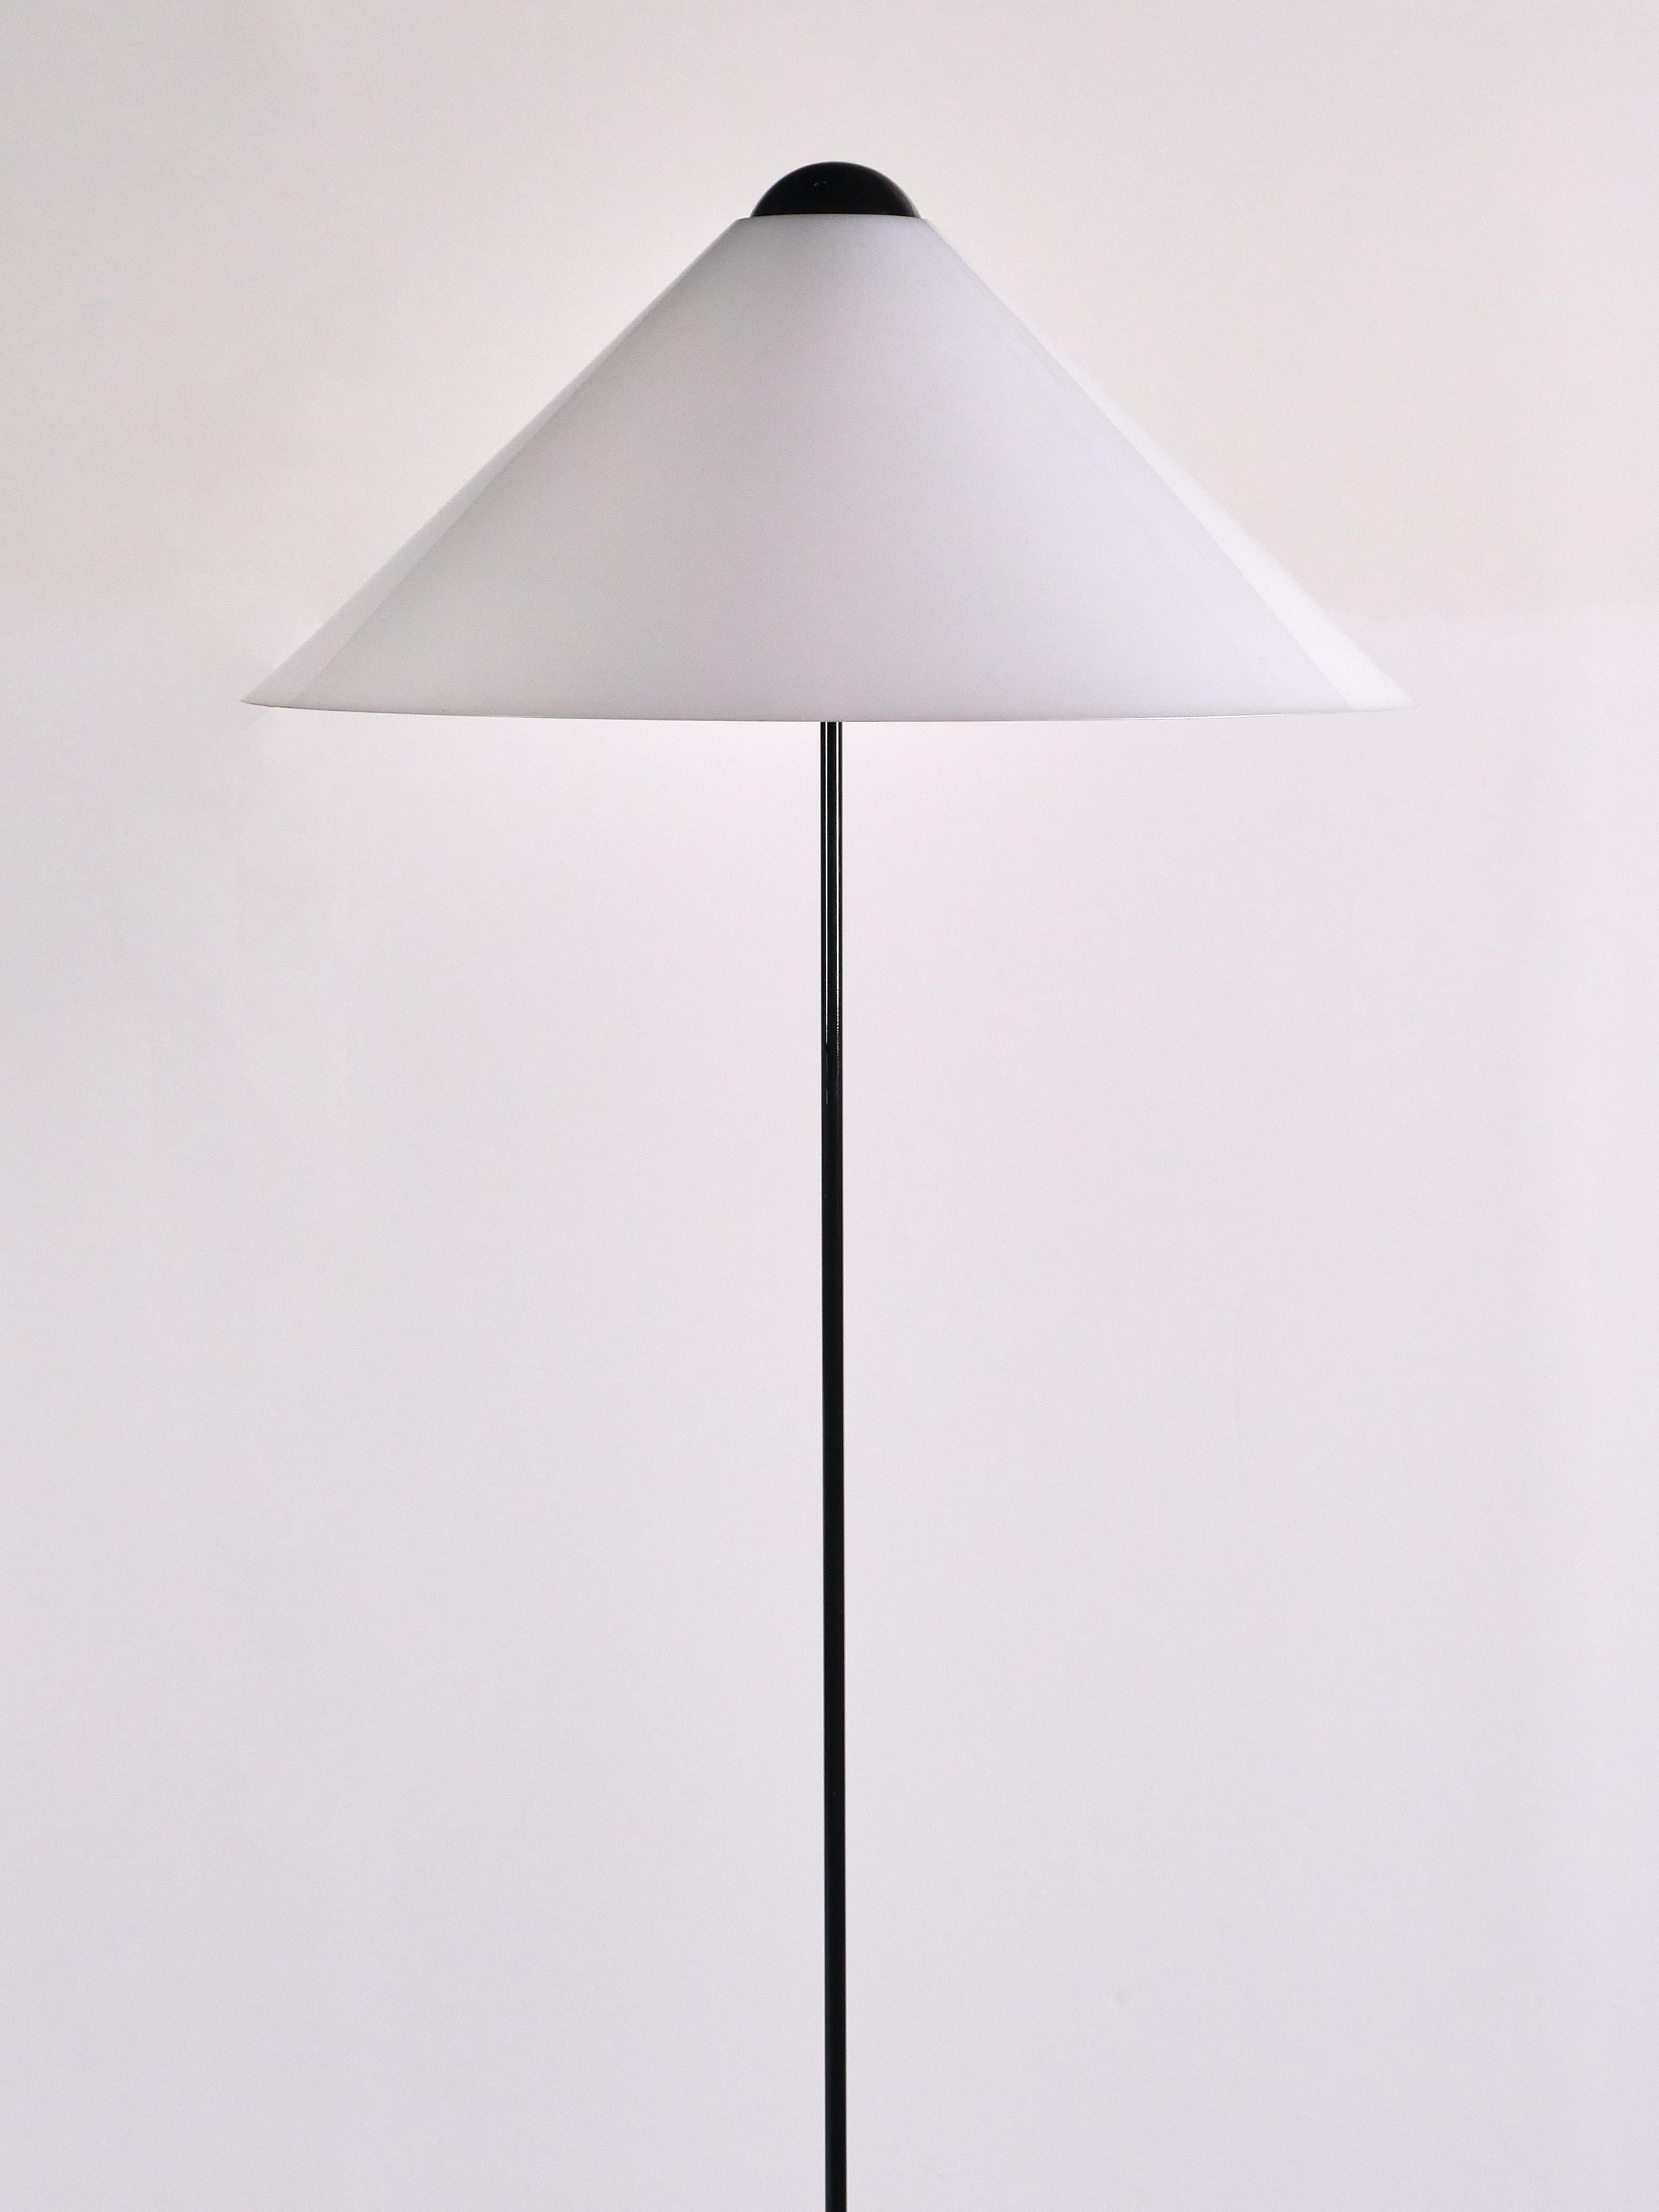 Mid-Century Modern Vico Magistretti 'Snow' Floor Lamp in Metal and Marble, Oluce, Italy, 1973